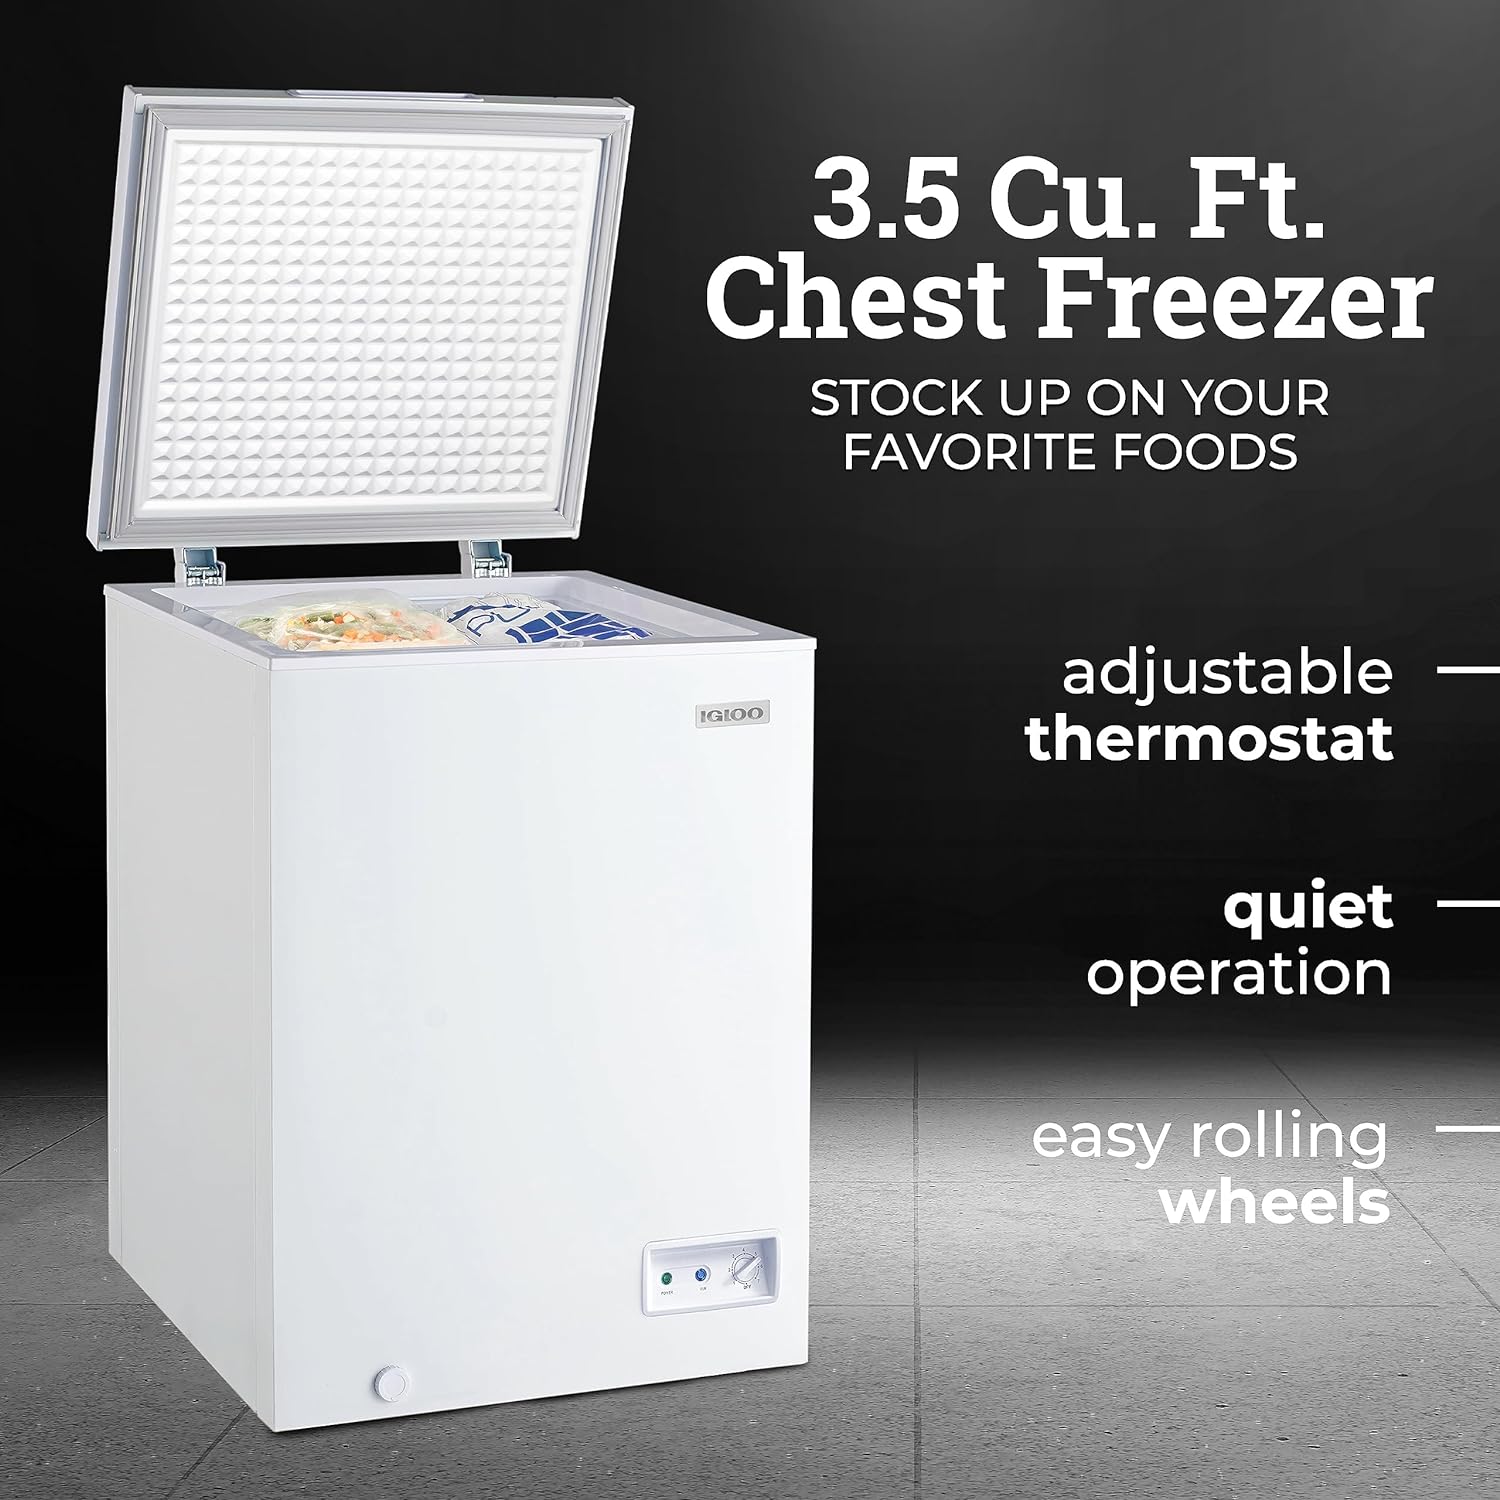 Igloo 3.5 Cu Ft Chest Freezer with Removable Basket and Front Defrost Water Drain